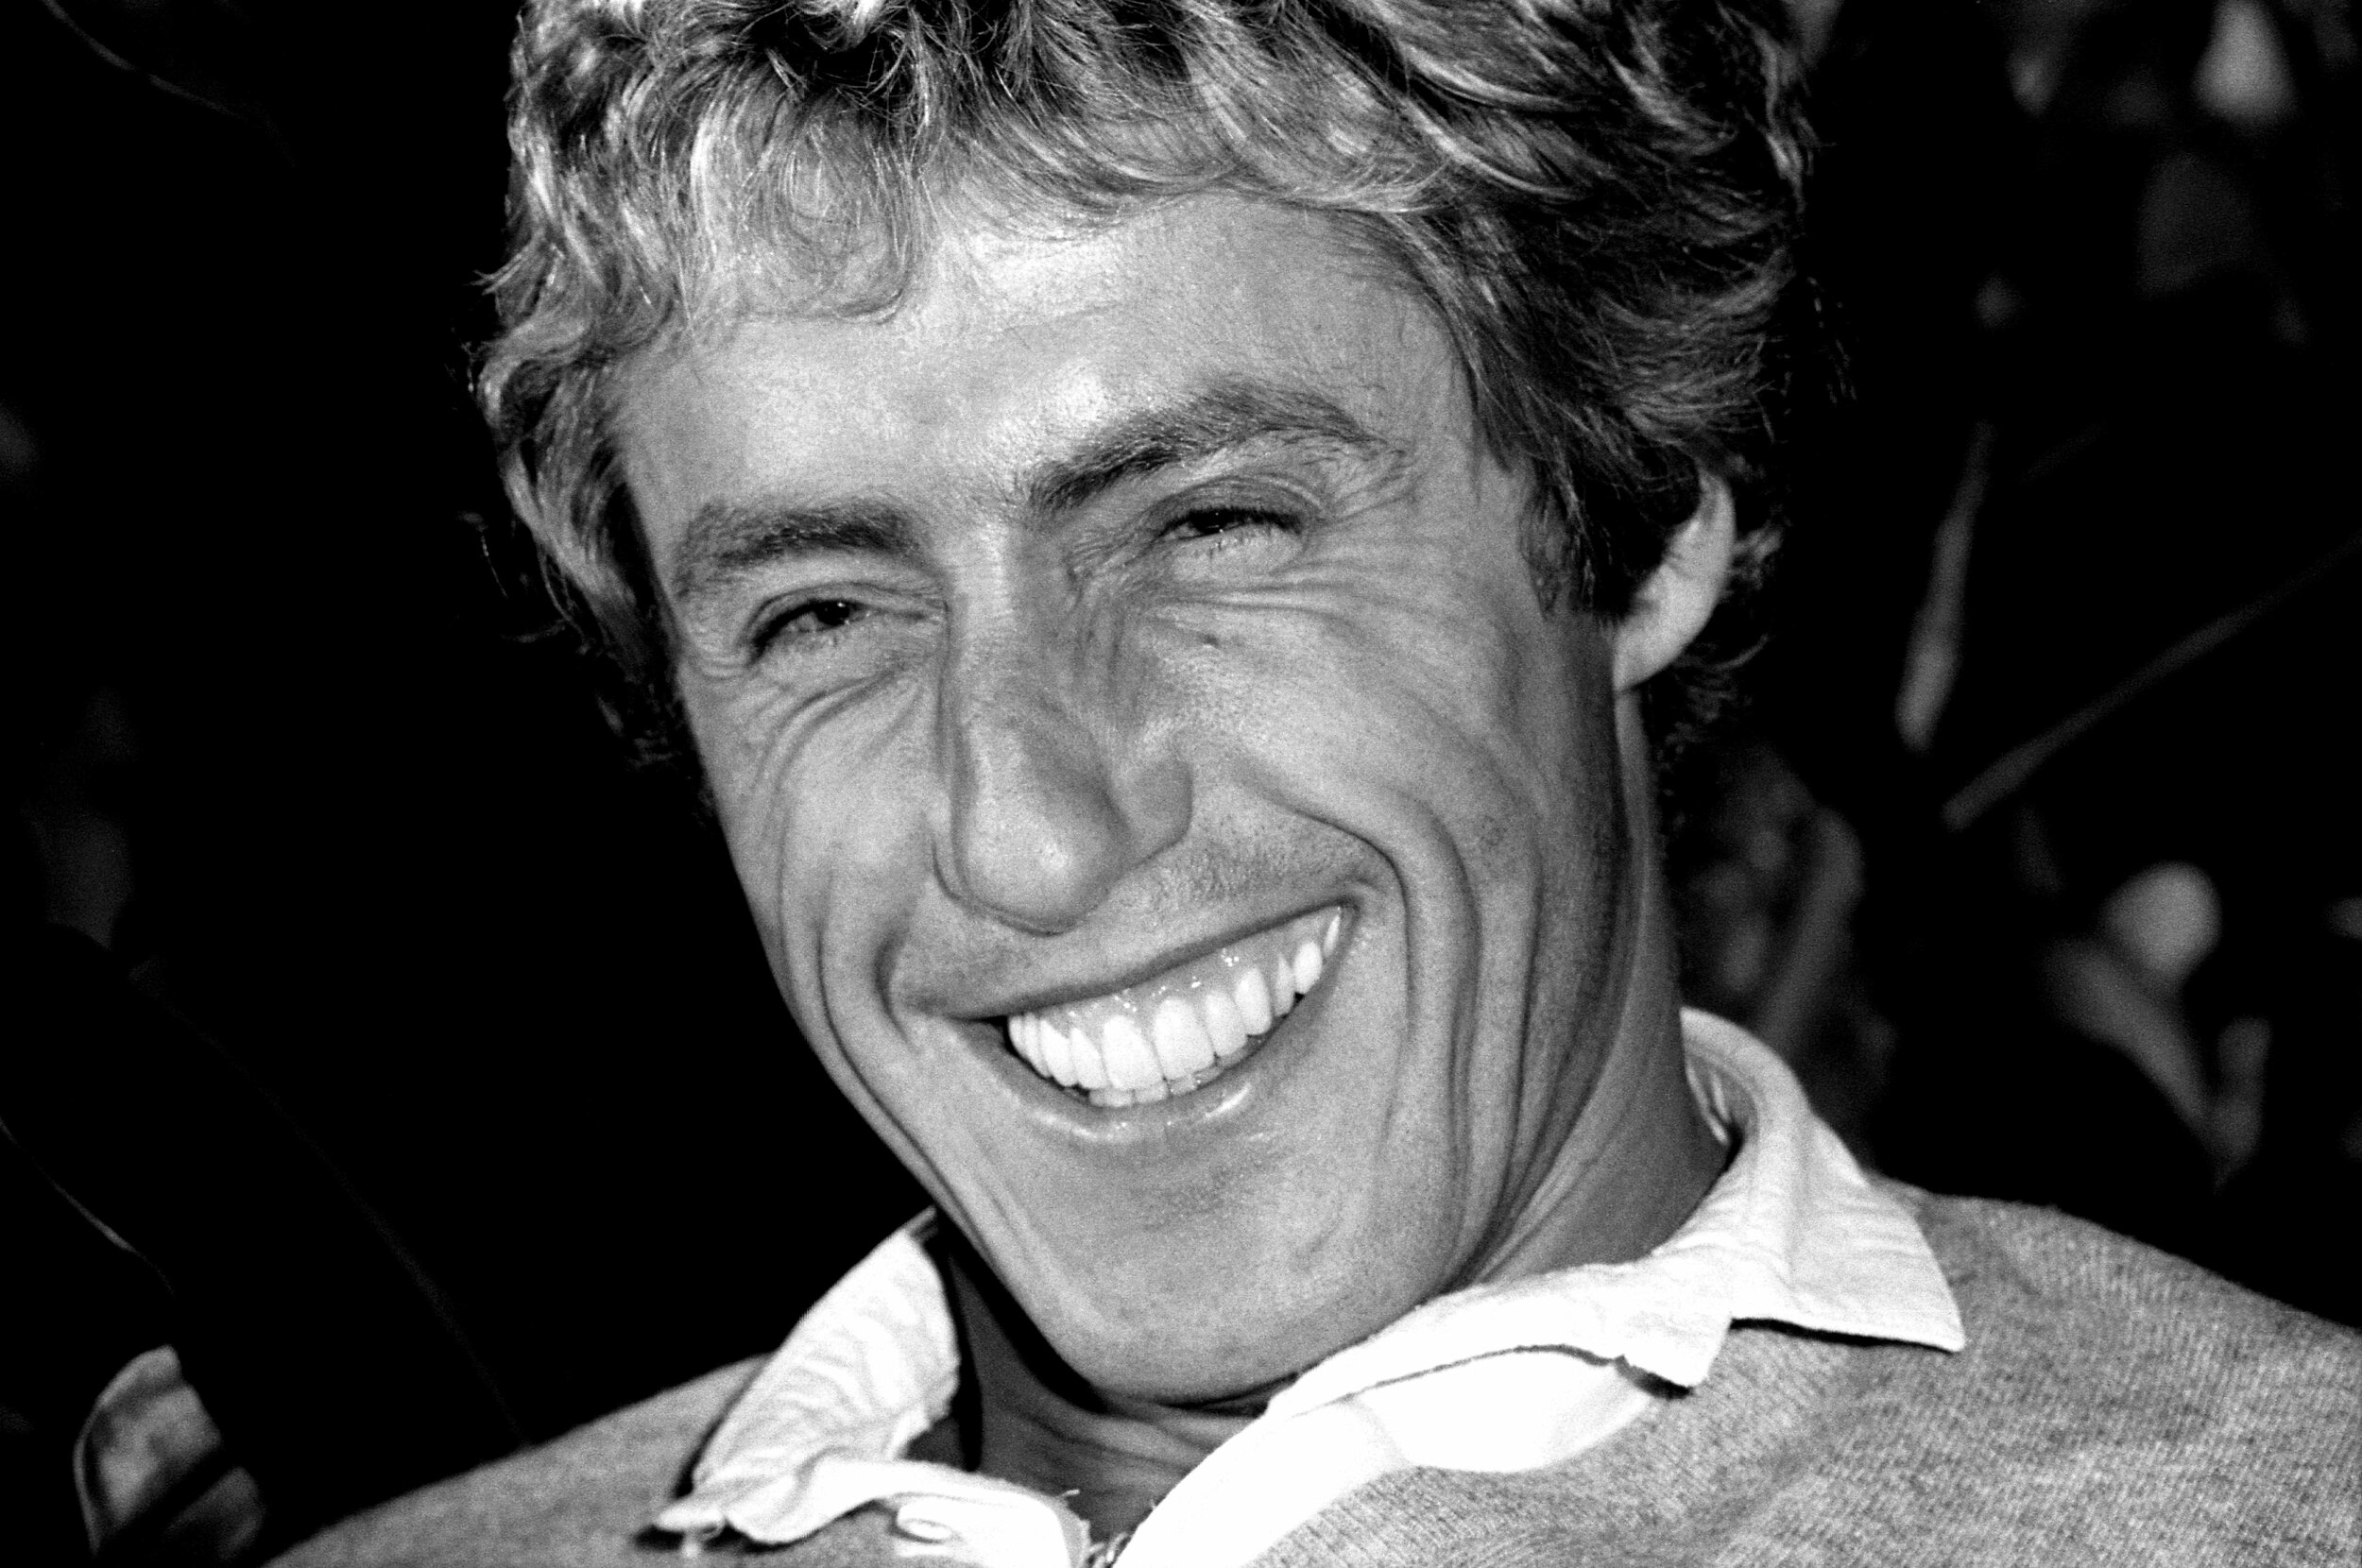 Roger Daltry Lead singer of The Who. 